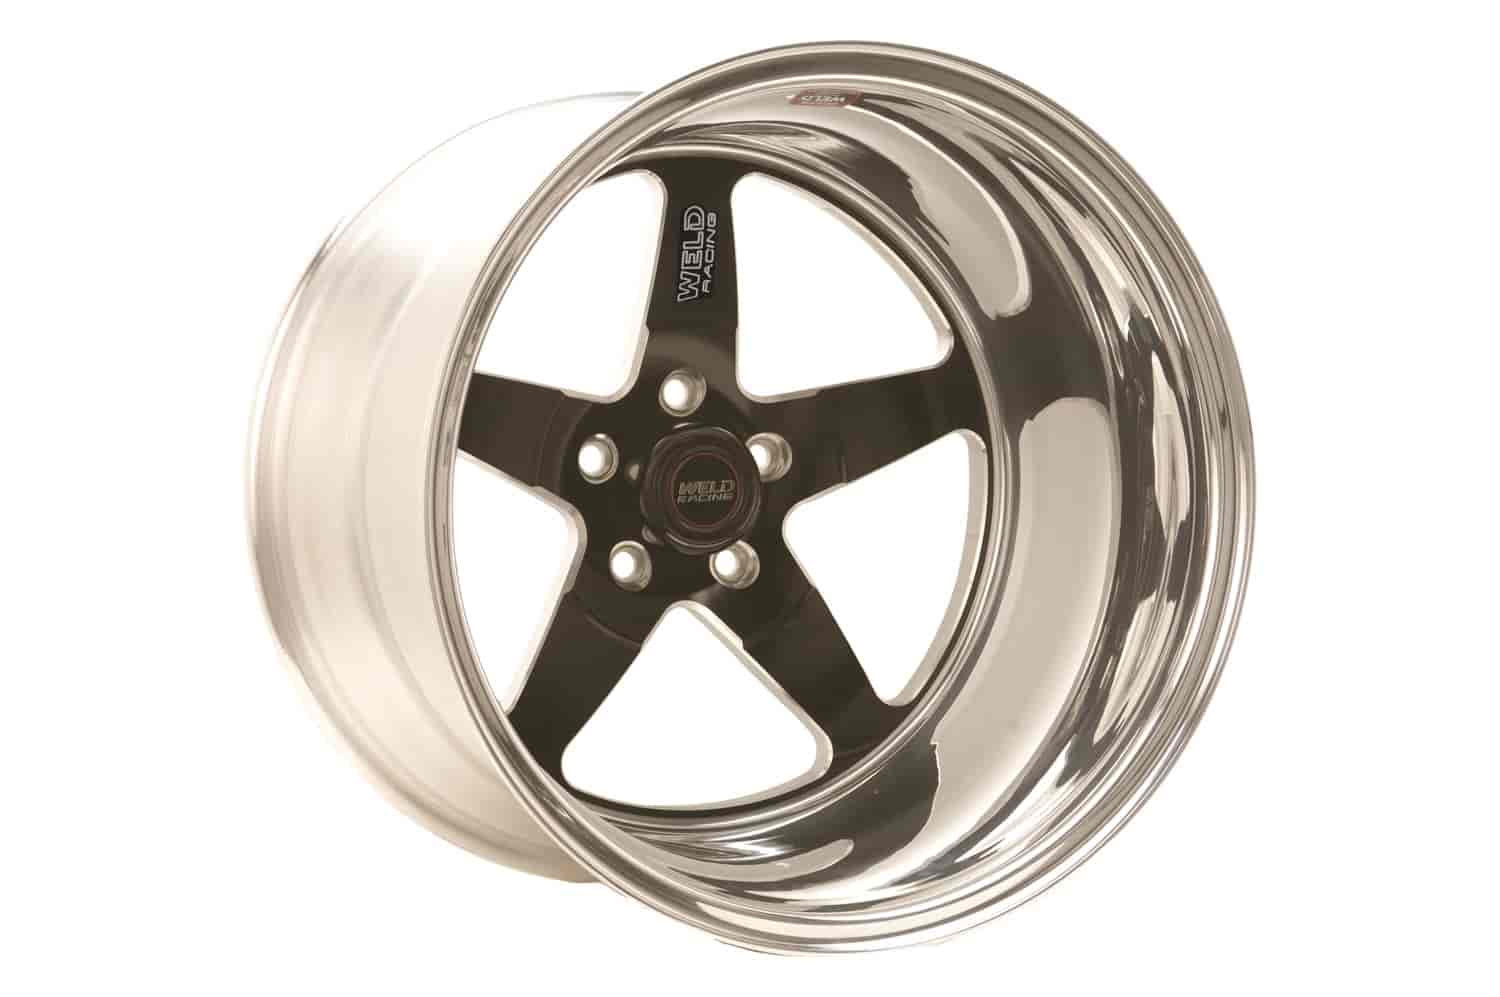 RT-S Series S71 Wheel Size: 15" x 8" Bolt Circle: 5 x 4-1/2" Back Space: 6-1/2"